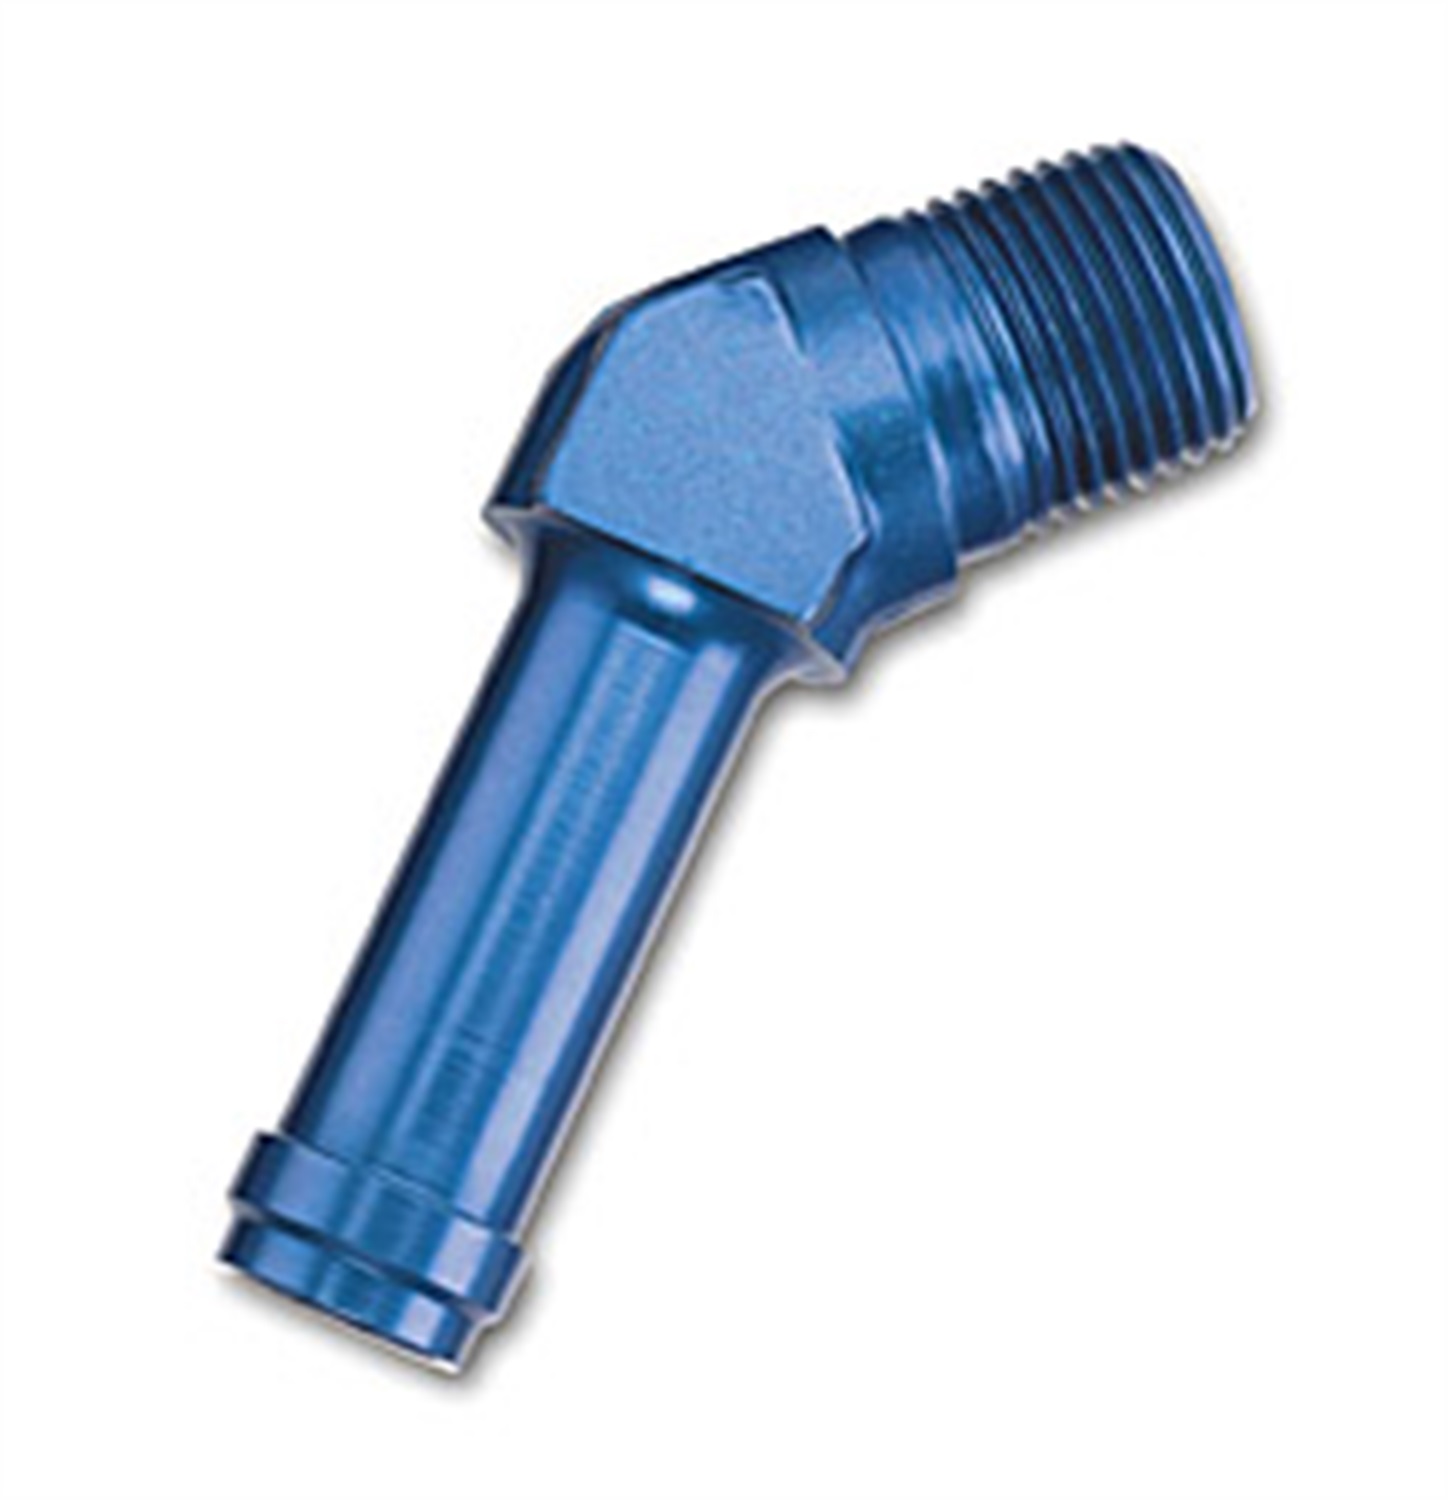 NPT Male to Hose Barb Fittings 45-Degree